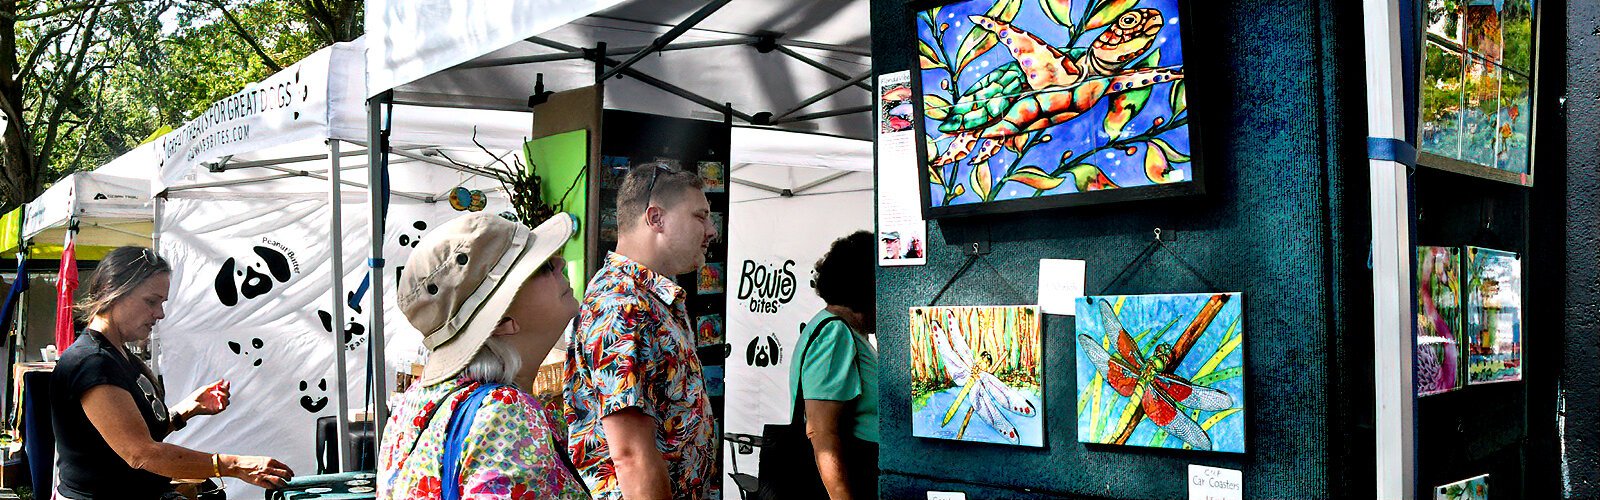 The ceramic tiles of Florida Vibes Art by John Rymer and Kevin Ritter catch the eyes of market goers with their whimsical and colorful representation of sea life and Florida life.